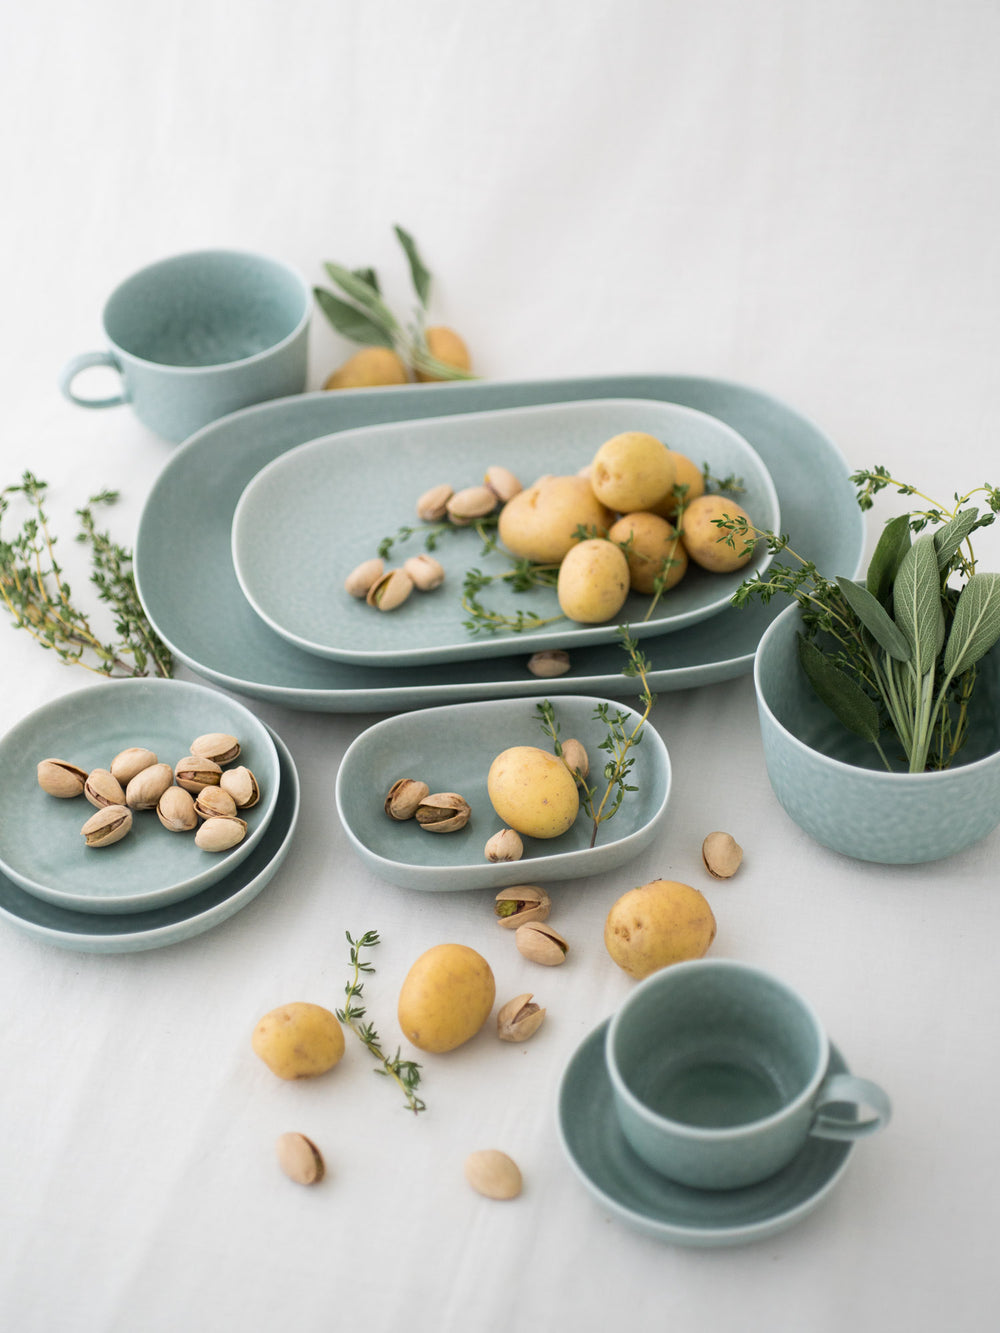 ReIRABO Oval Plate – Spring Mint Green